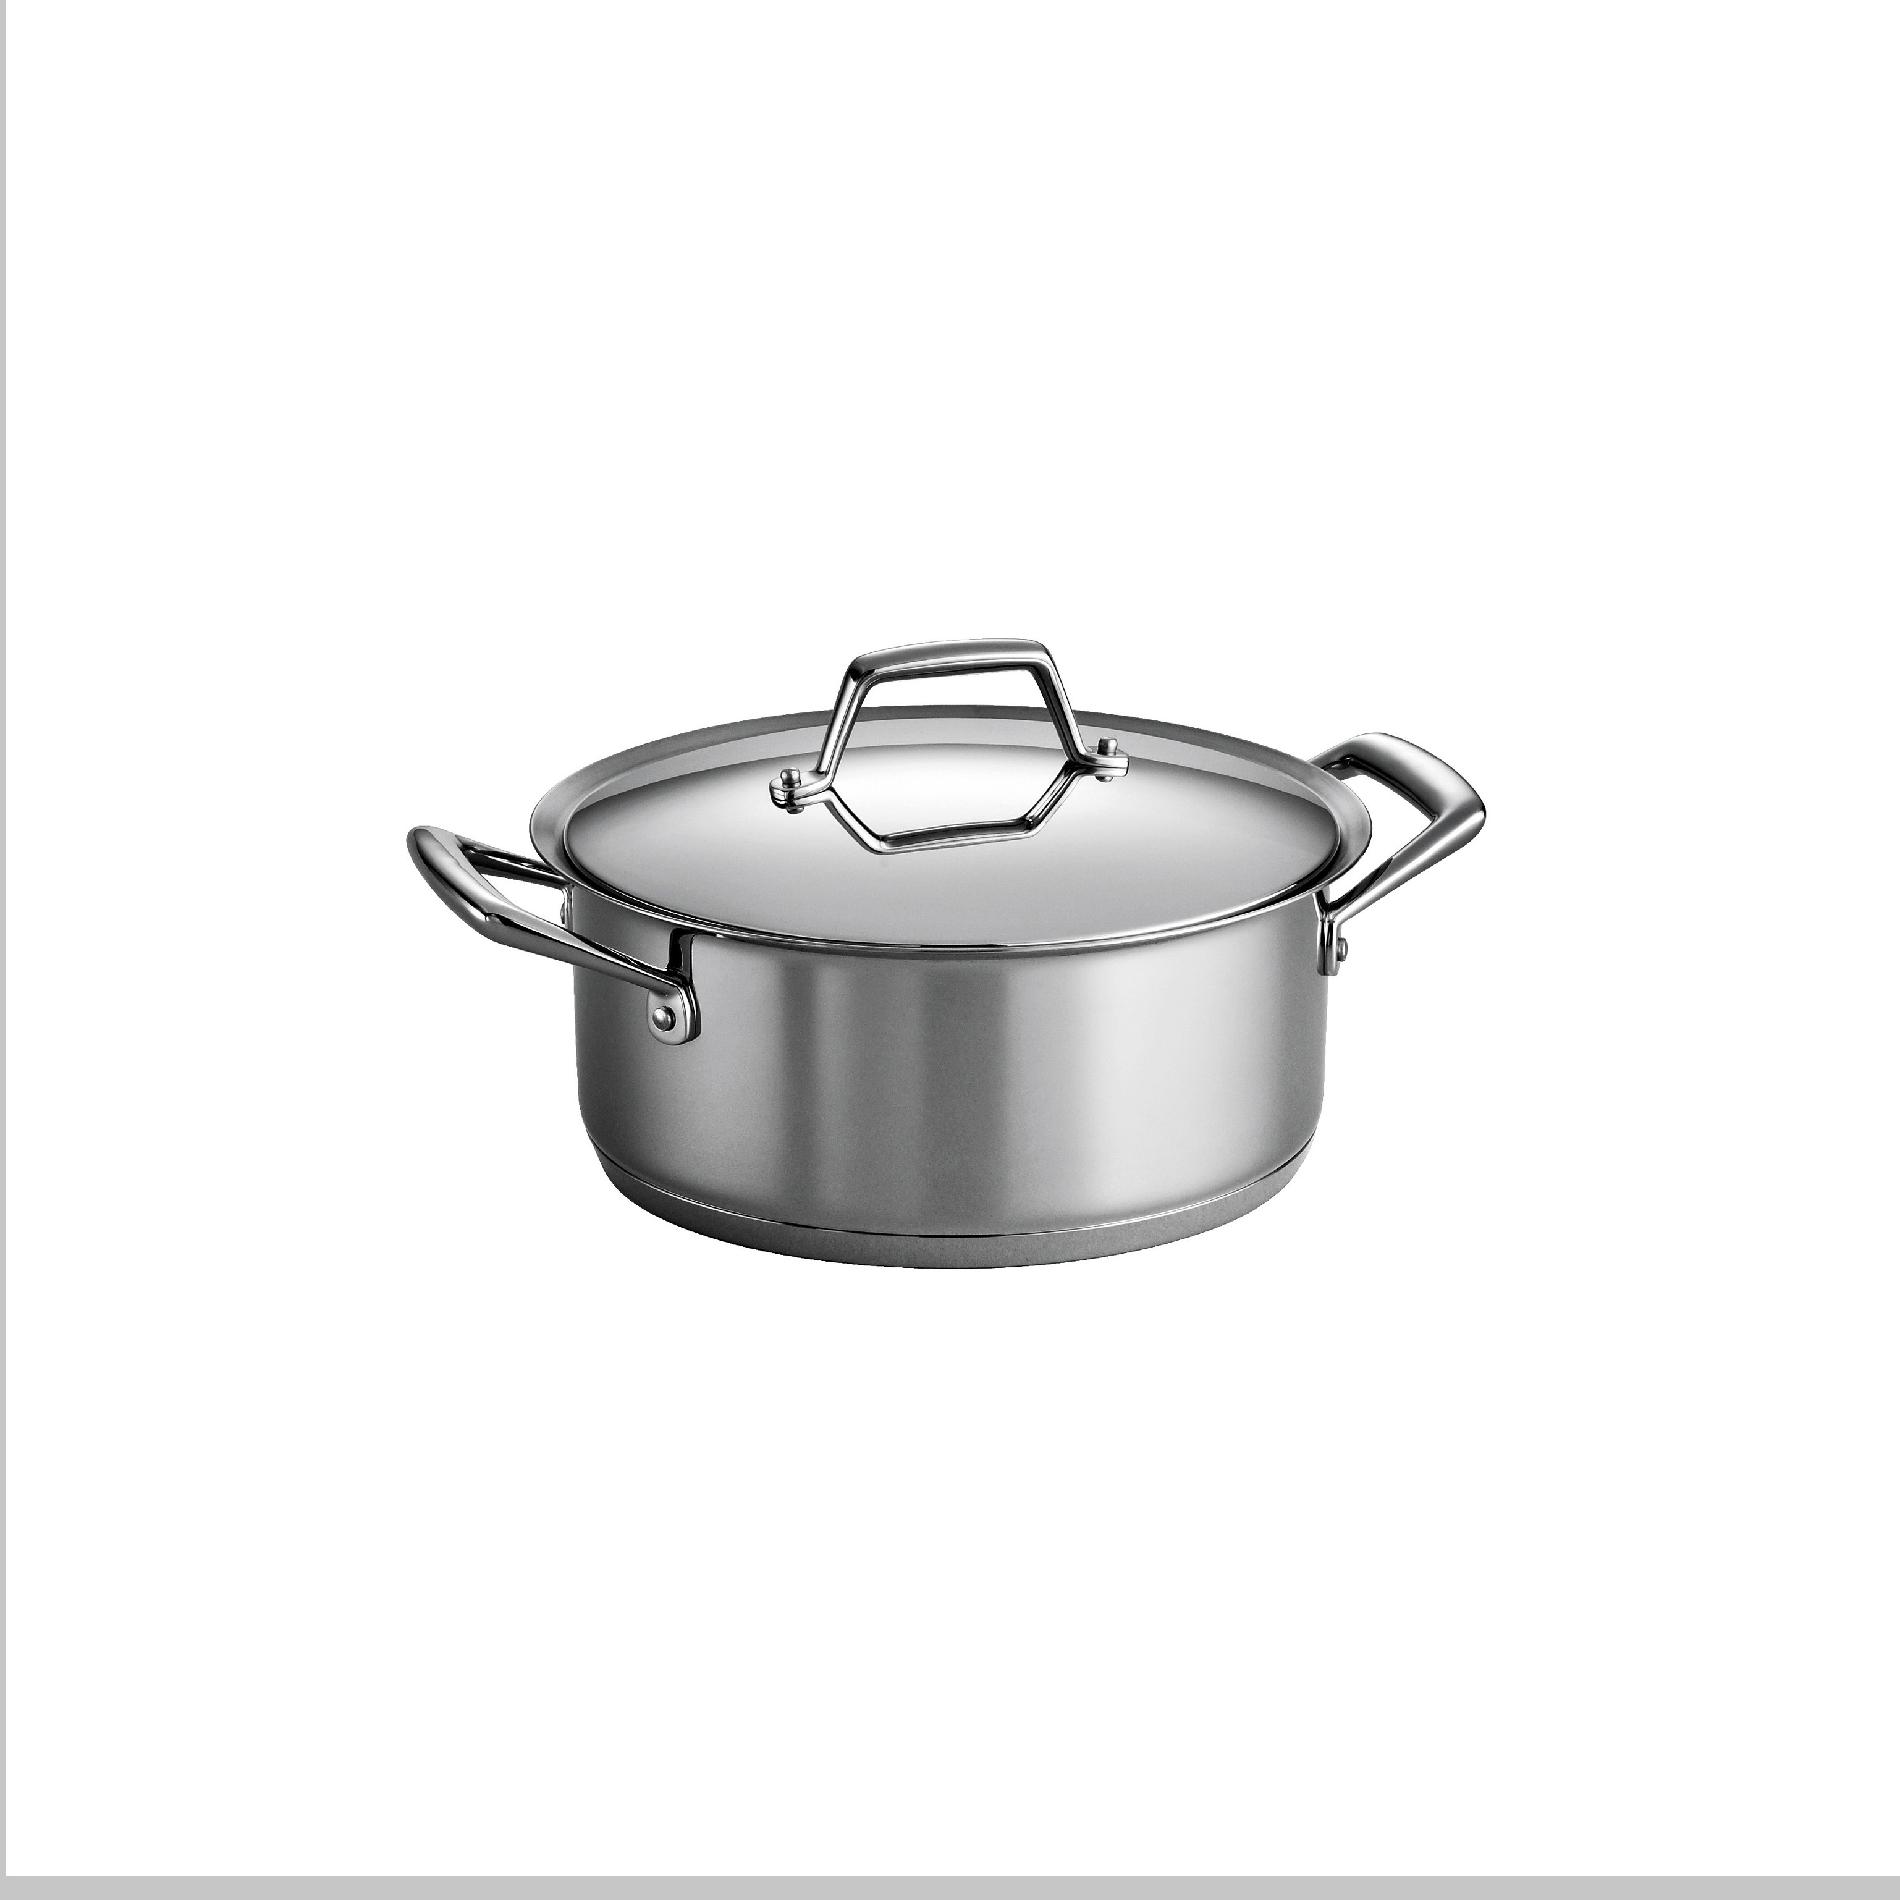 Gourmet Prima 18/10 Stainless Steel 6 Qt Covered Sauce Pot